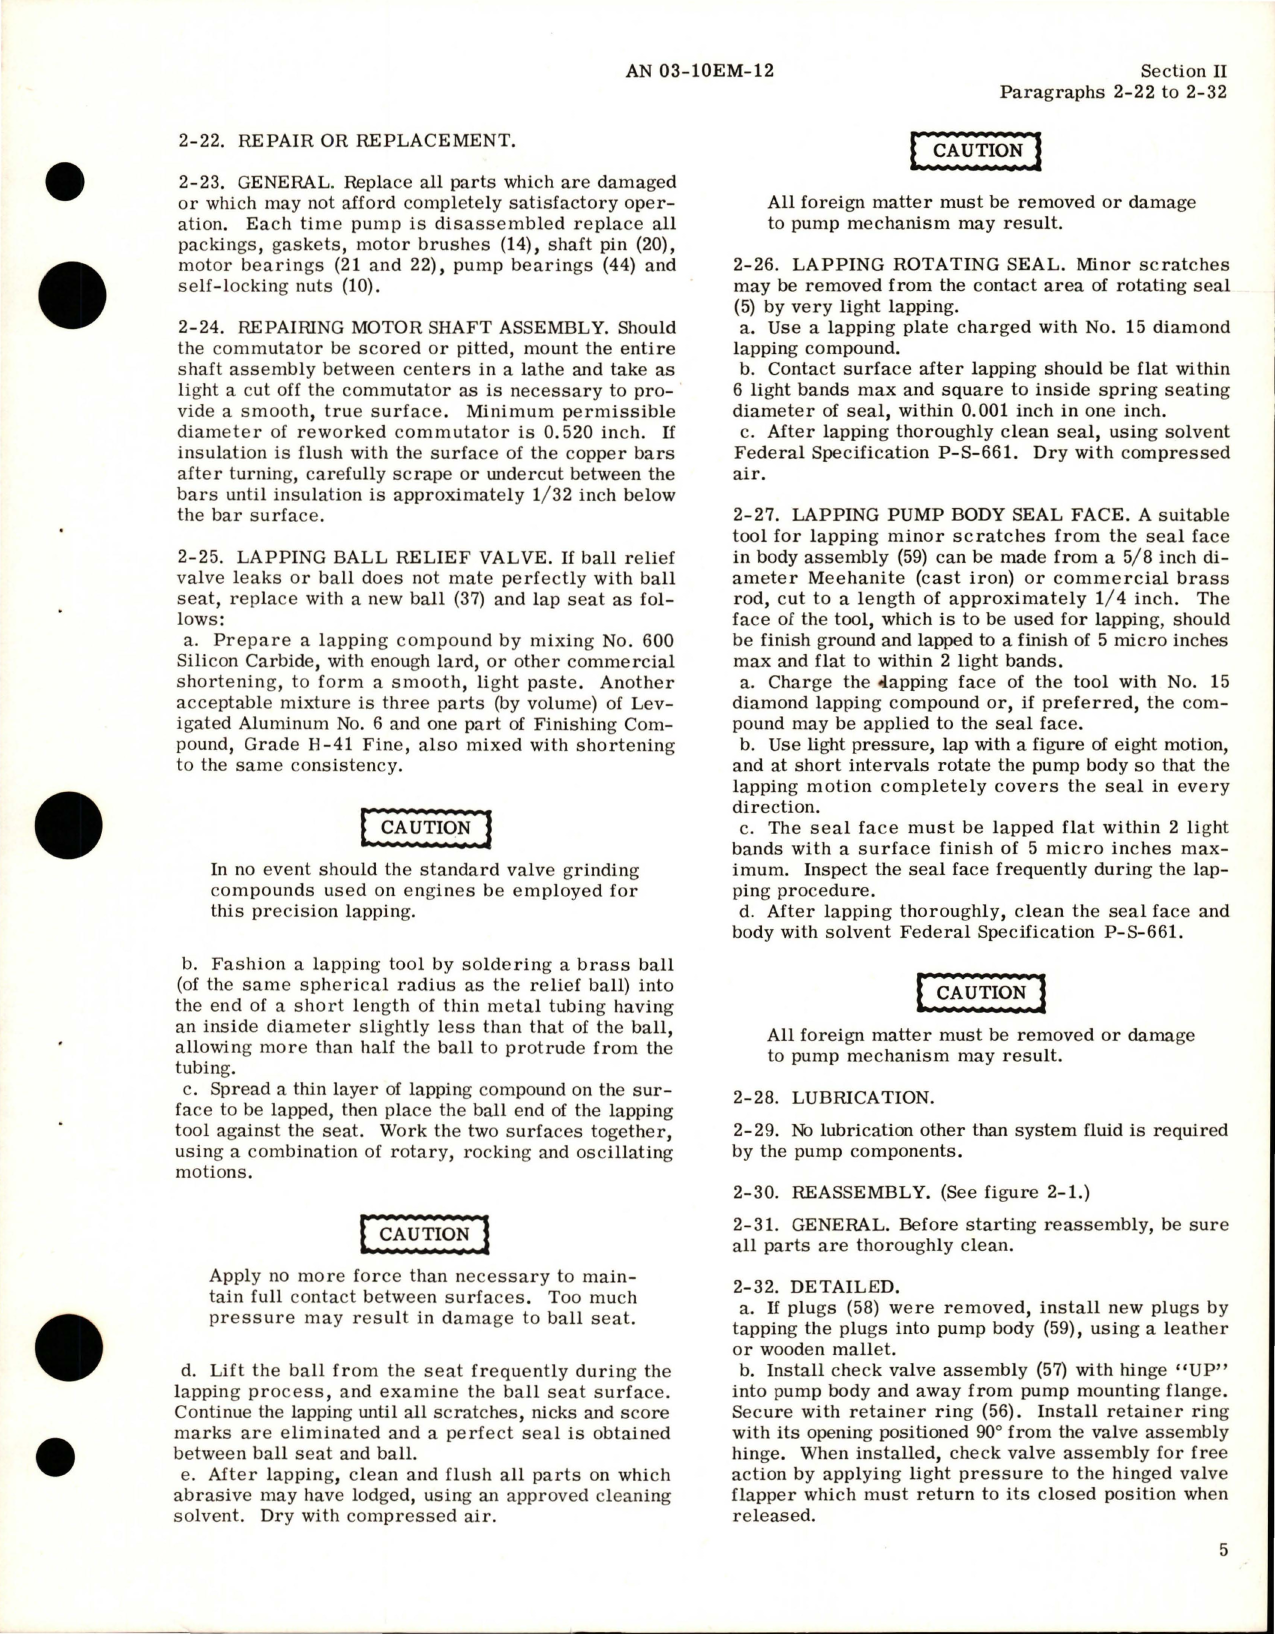 Sample page 9 from AirCorps Library document: Overhaul Instructions for Submerged Fuel Boost Pump